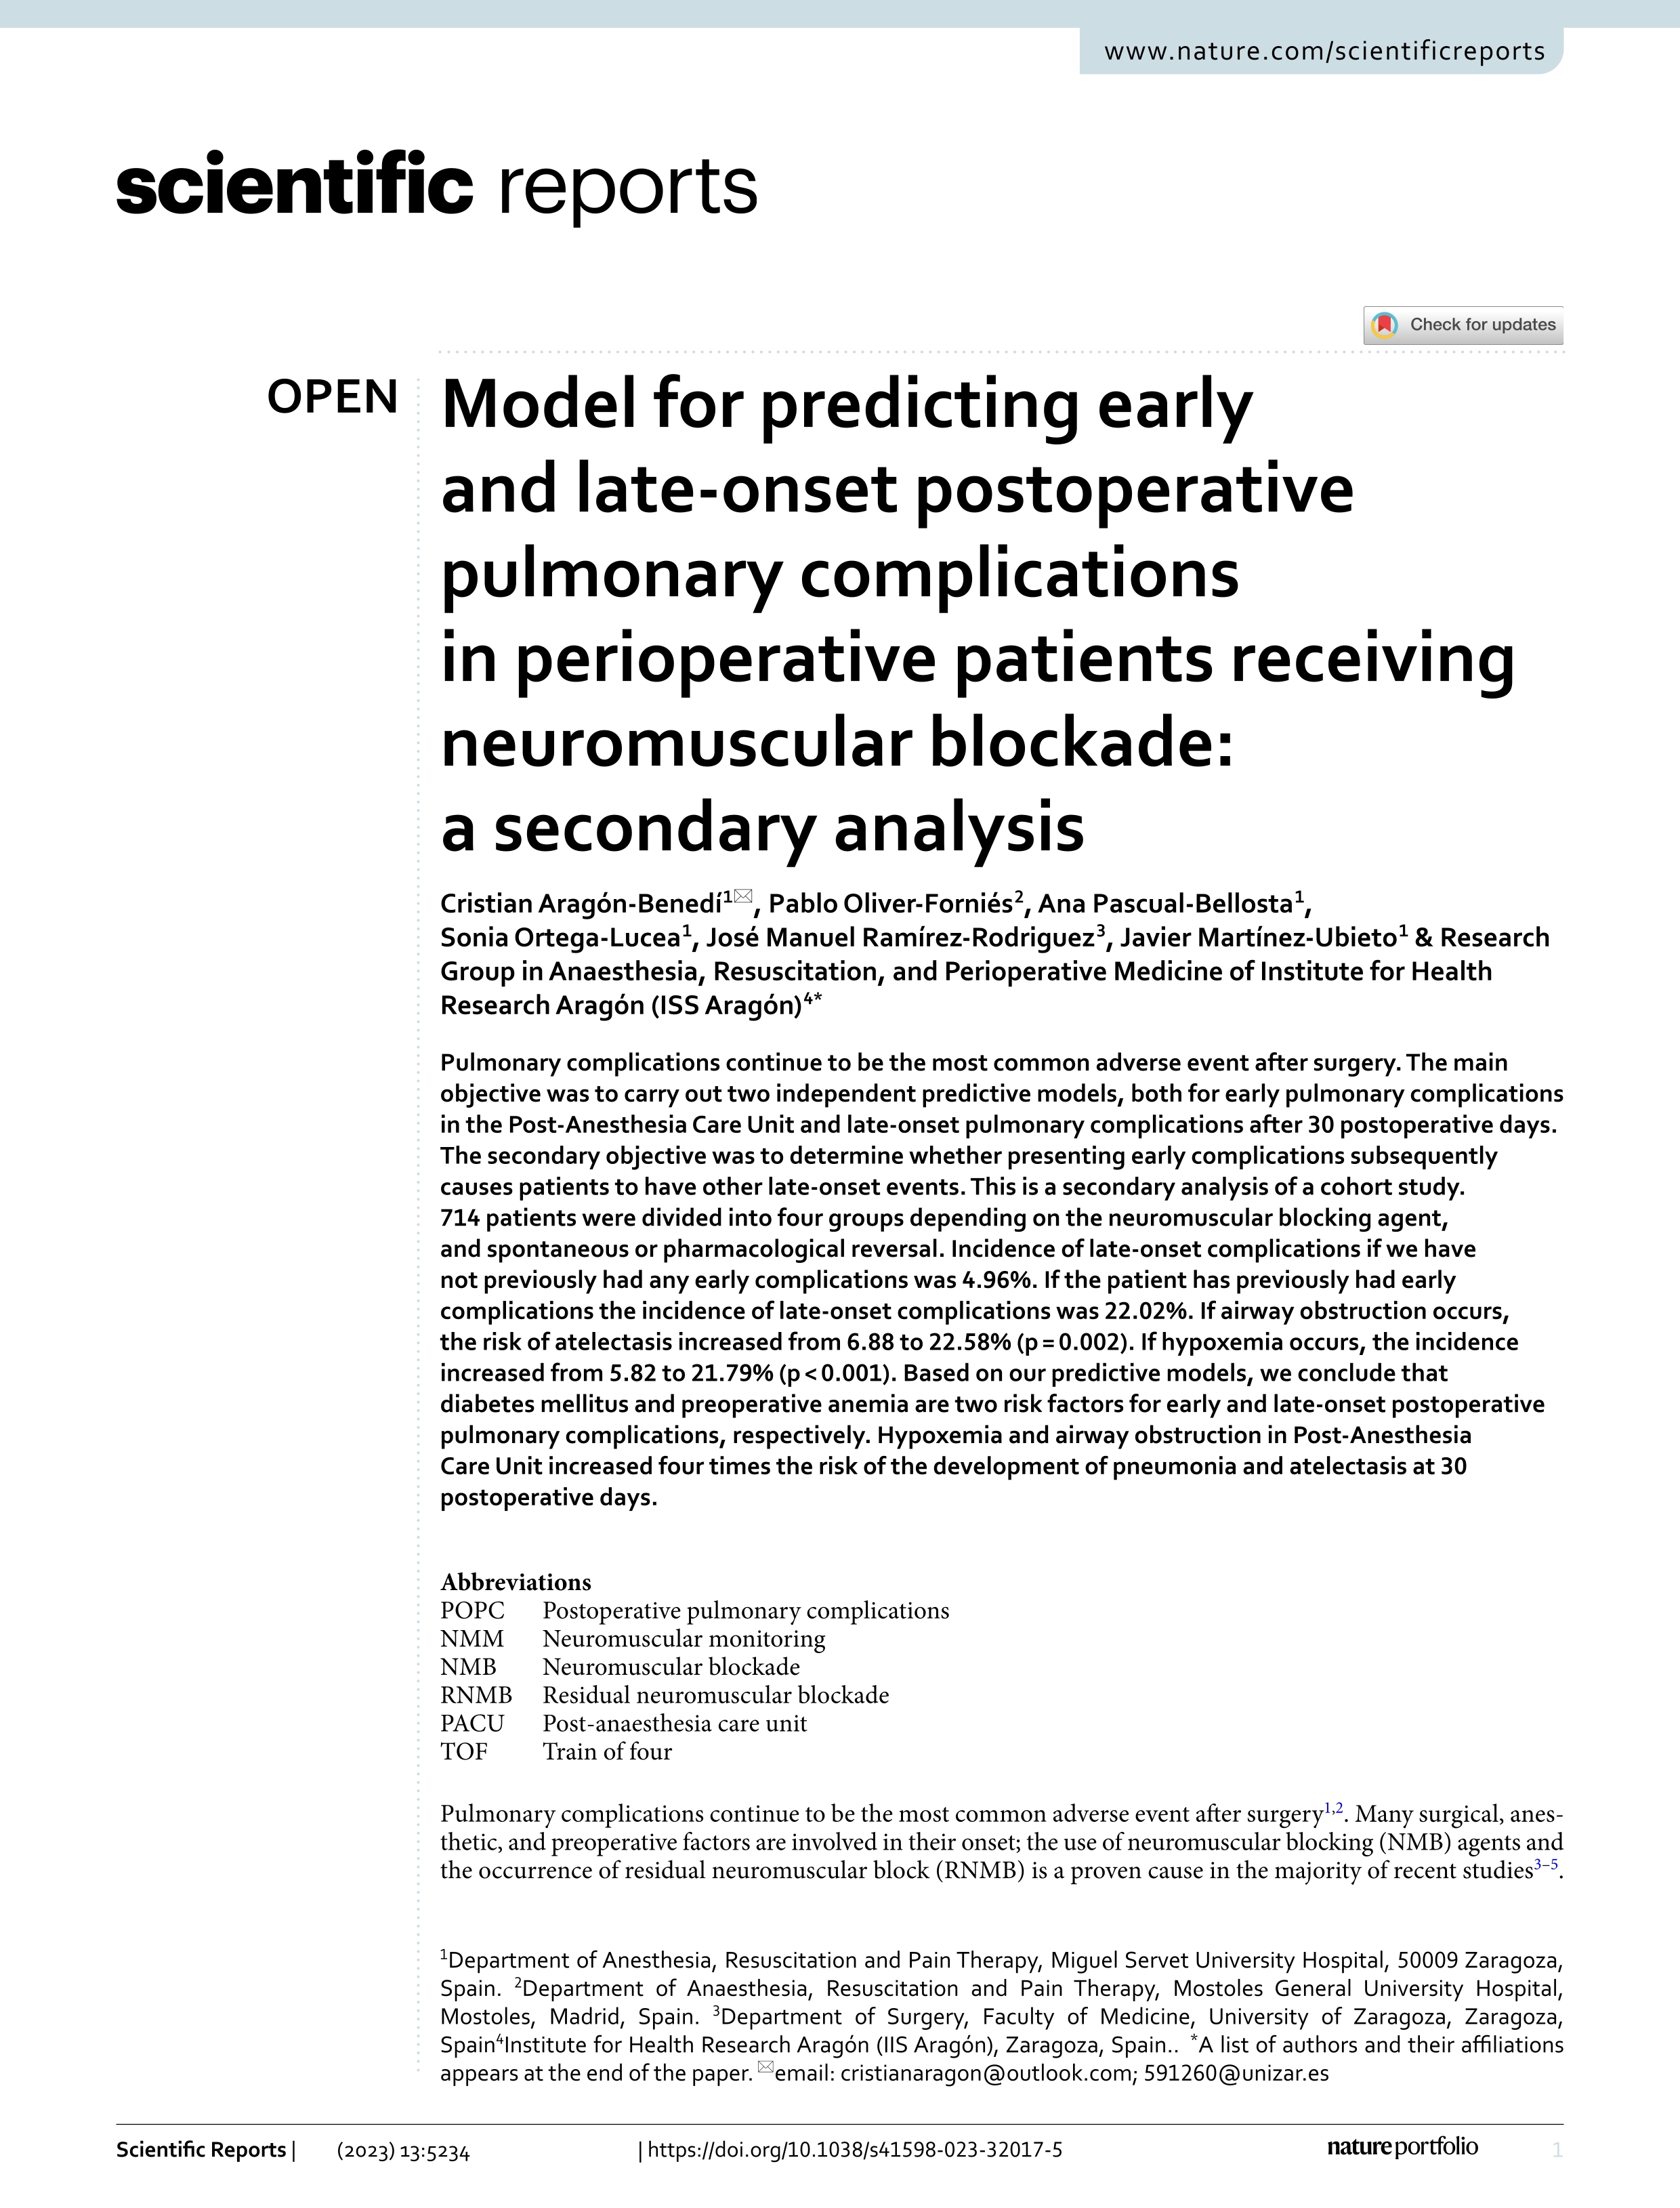 Model for predicting early and late-onset postoperative pulmonary complications in perioperative patients receiving neuromuscular blockade: a secondary analysis